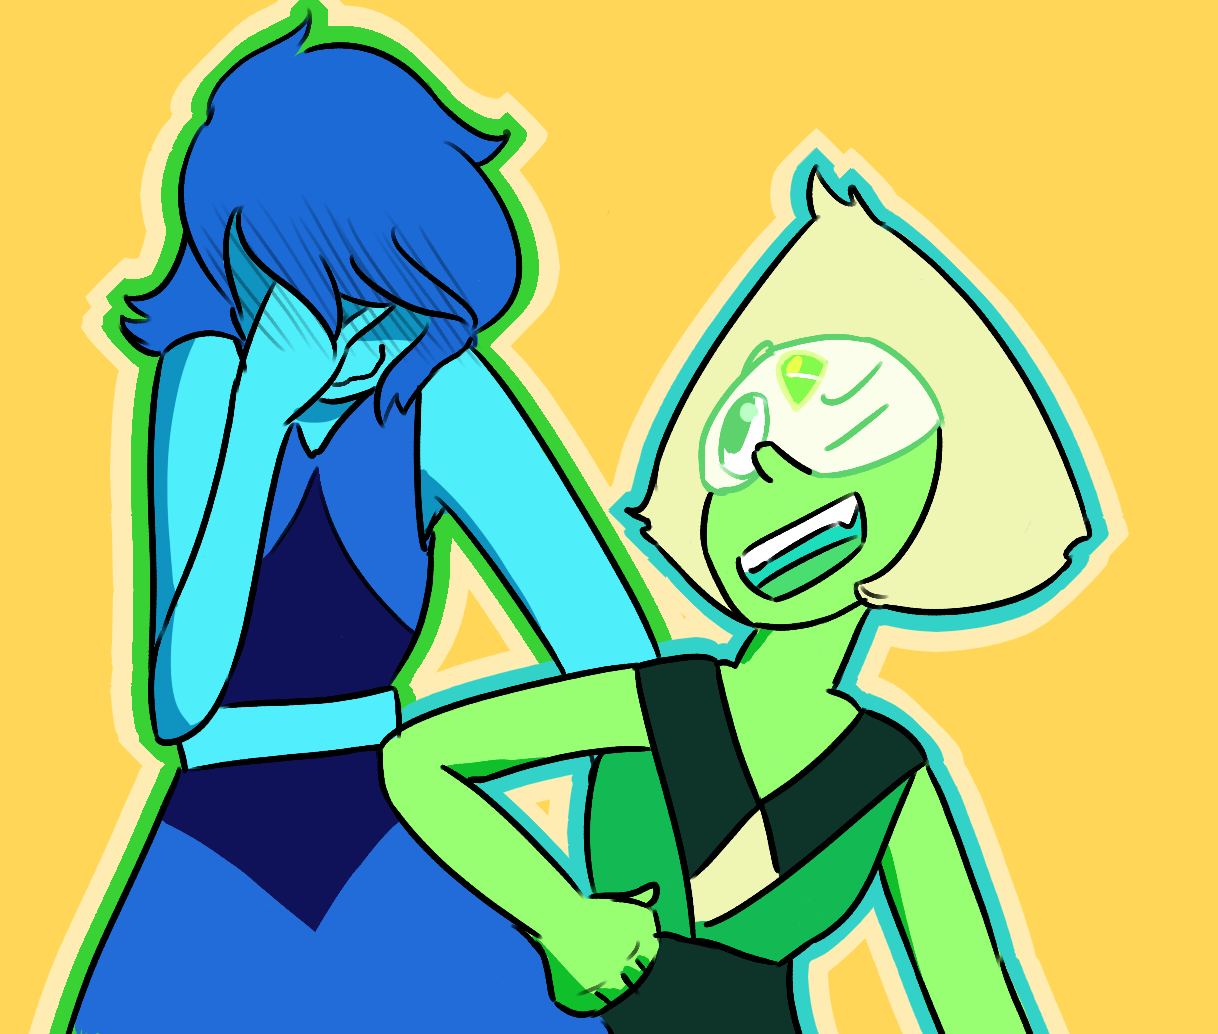 Lapis “I did not teach her that” Lazuli and Little Green “I cheer up friends by shouting innuendos” Goblin (ie Peridot)